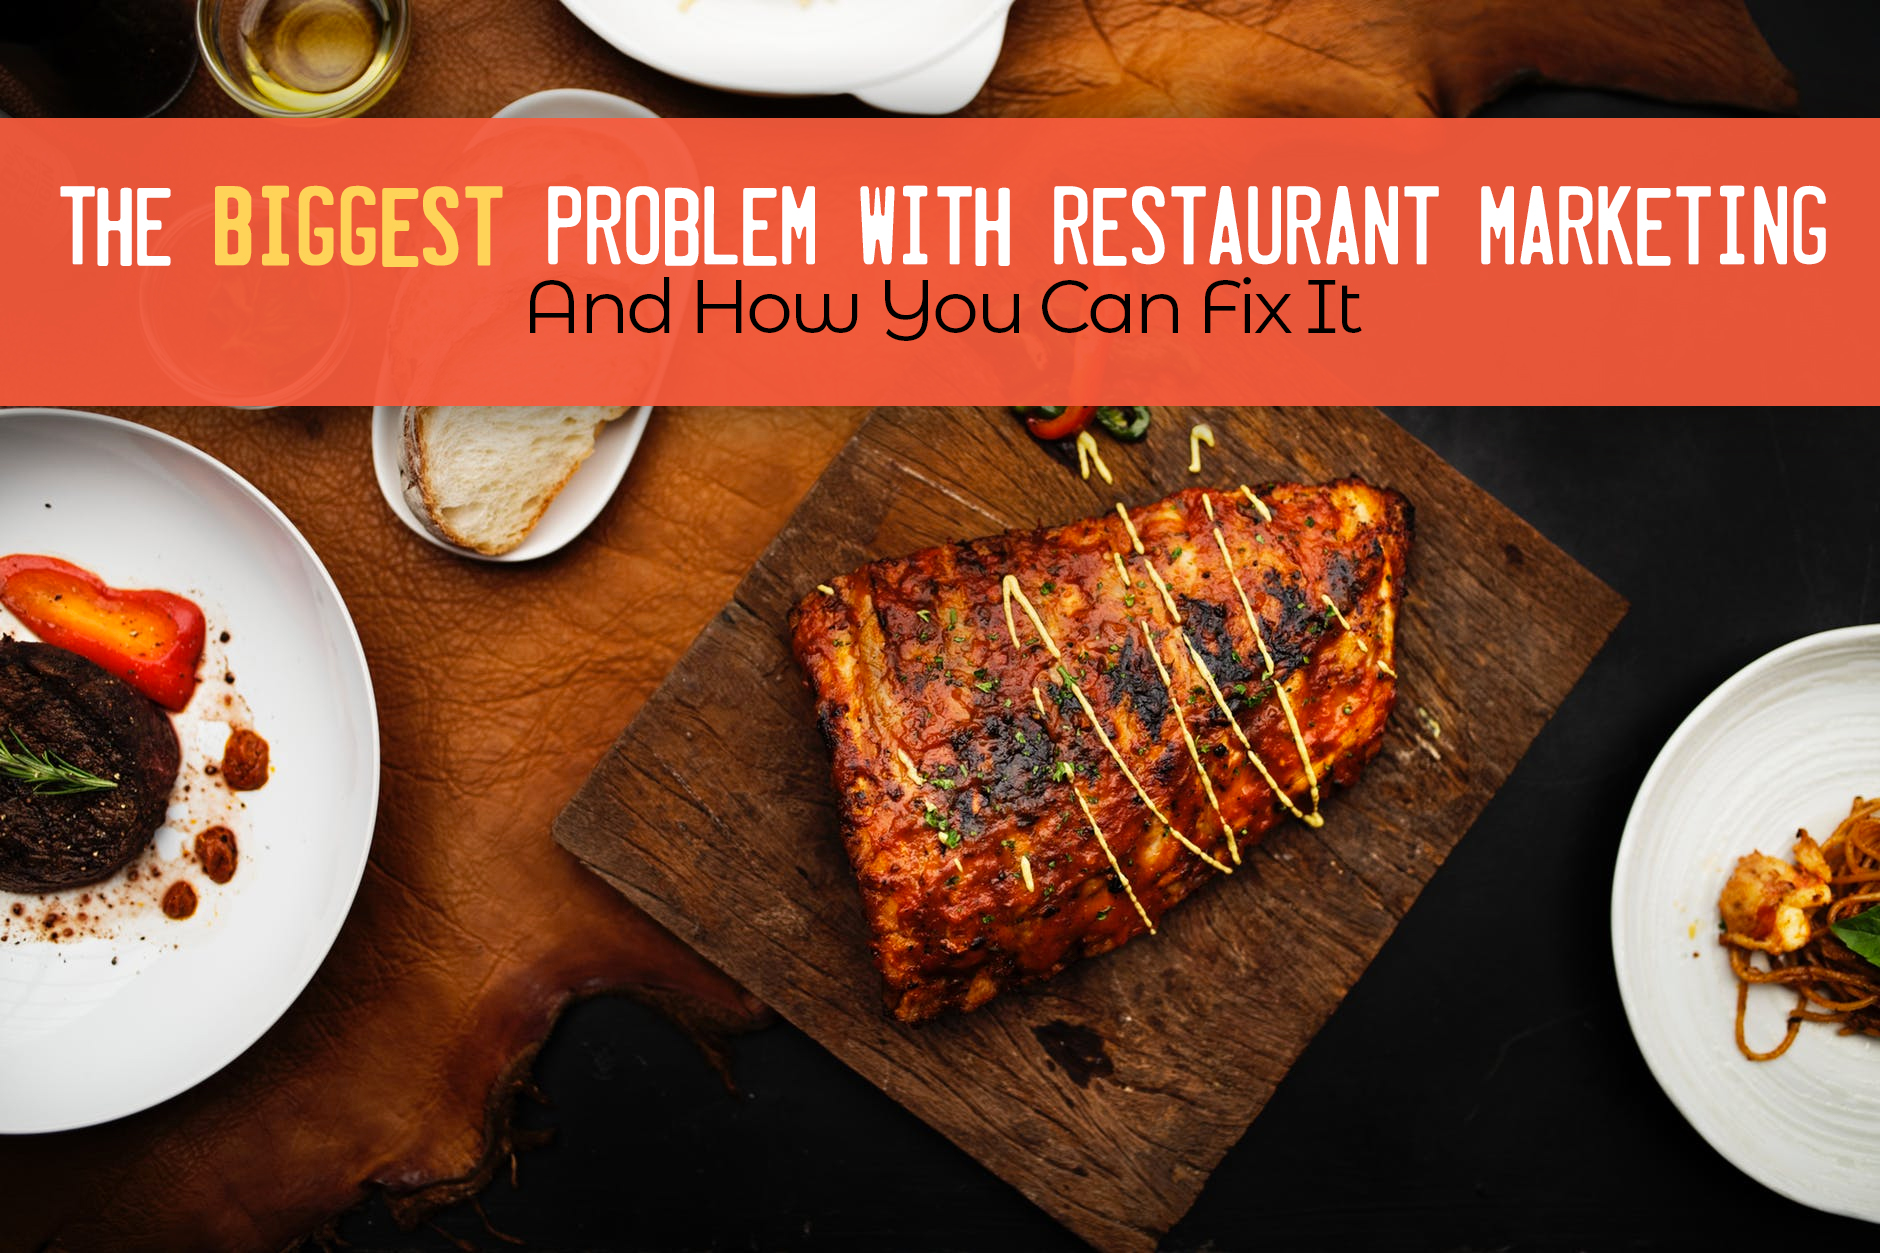 Restaurant Marketing Costs: A Low Cost Approach